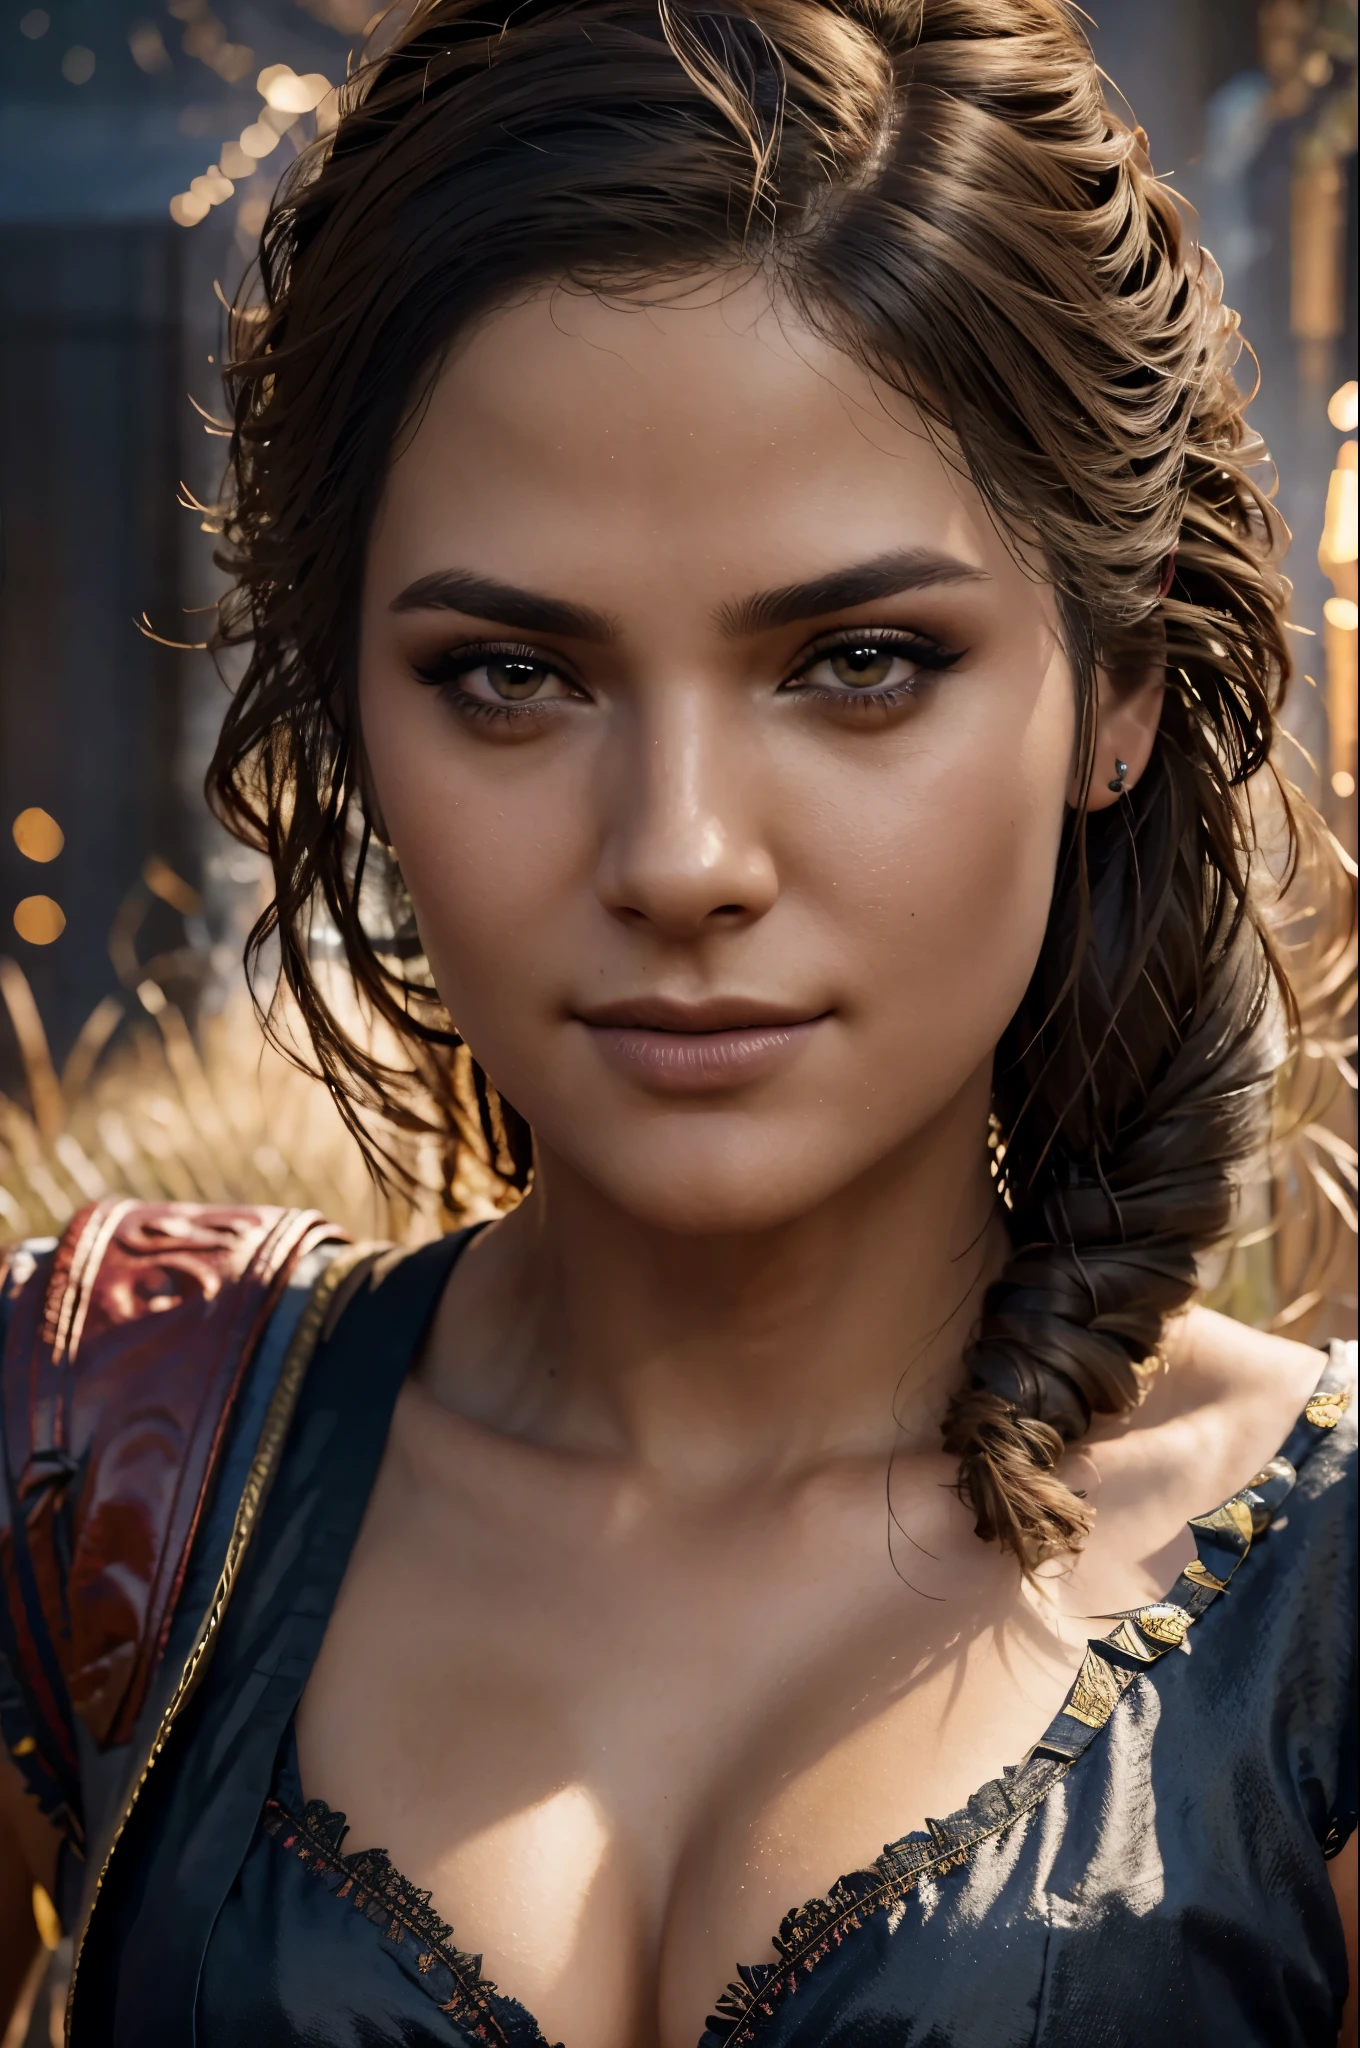 (best quality,ultra-detailed,realistic:1.37),(HDR,UHD,studio lighting),(portraits),(vivid colors),(warm color tones),(soft,moody lighting),(sharp focus),(bokeh),Kassandra,Assassin's Creed Universe,Kassandra's stunning face,Kassandra's piercing eyes,Kassandra's alluring gaze,Kassandra's seductive lips,Kassandra's flowing hair,Kassandra's confident and provocative smile,mysterious atmosphere,dark and gritty background,tattoos on Kassandra's body,ornate assassin gear,fierce and powerful stance,sparkling jewelry,dramatic lighting to accentuate facial features,subtle makeup,subtle hints of smoke or mist,nighttime setting,embers glowing in the background,subtle moonlight bathing the scene